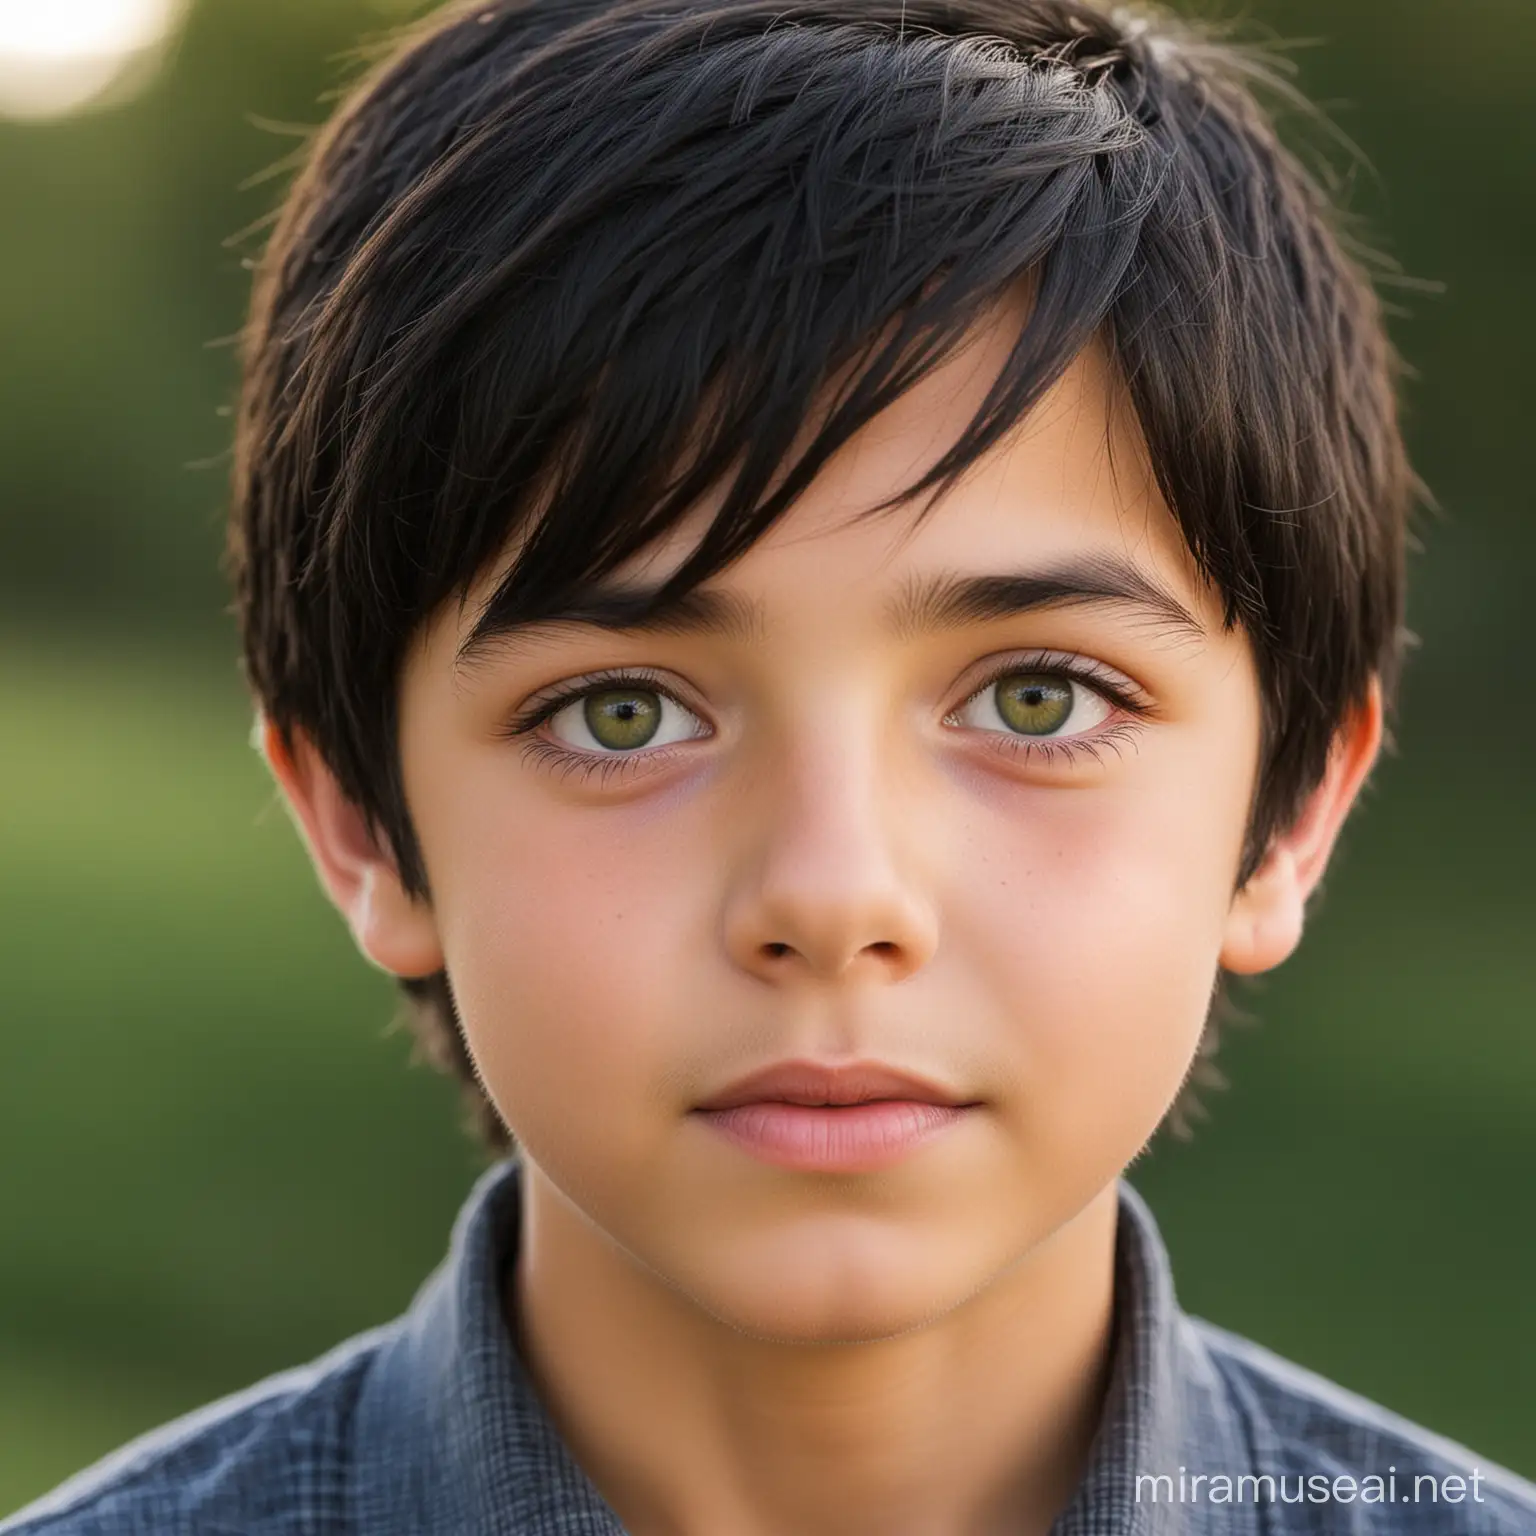 olive skinned preteen boy, with bright eyes, and coarse straight black hair